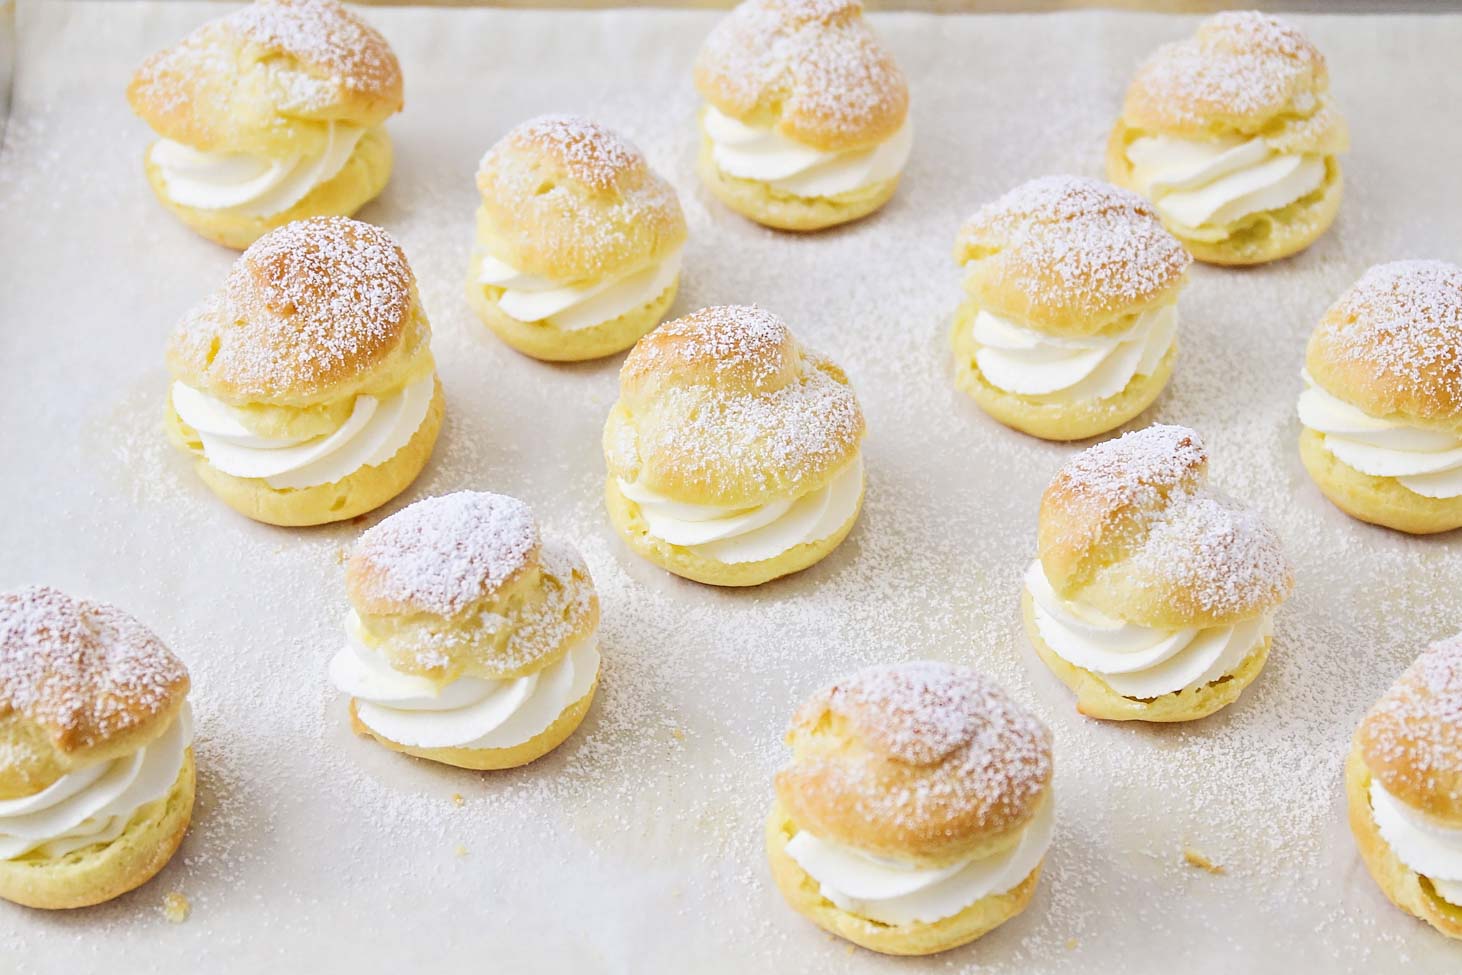 Homemade cream puffs recipe sprinkled with powdered sugar.